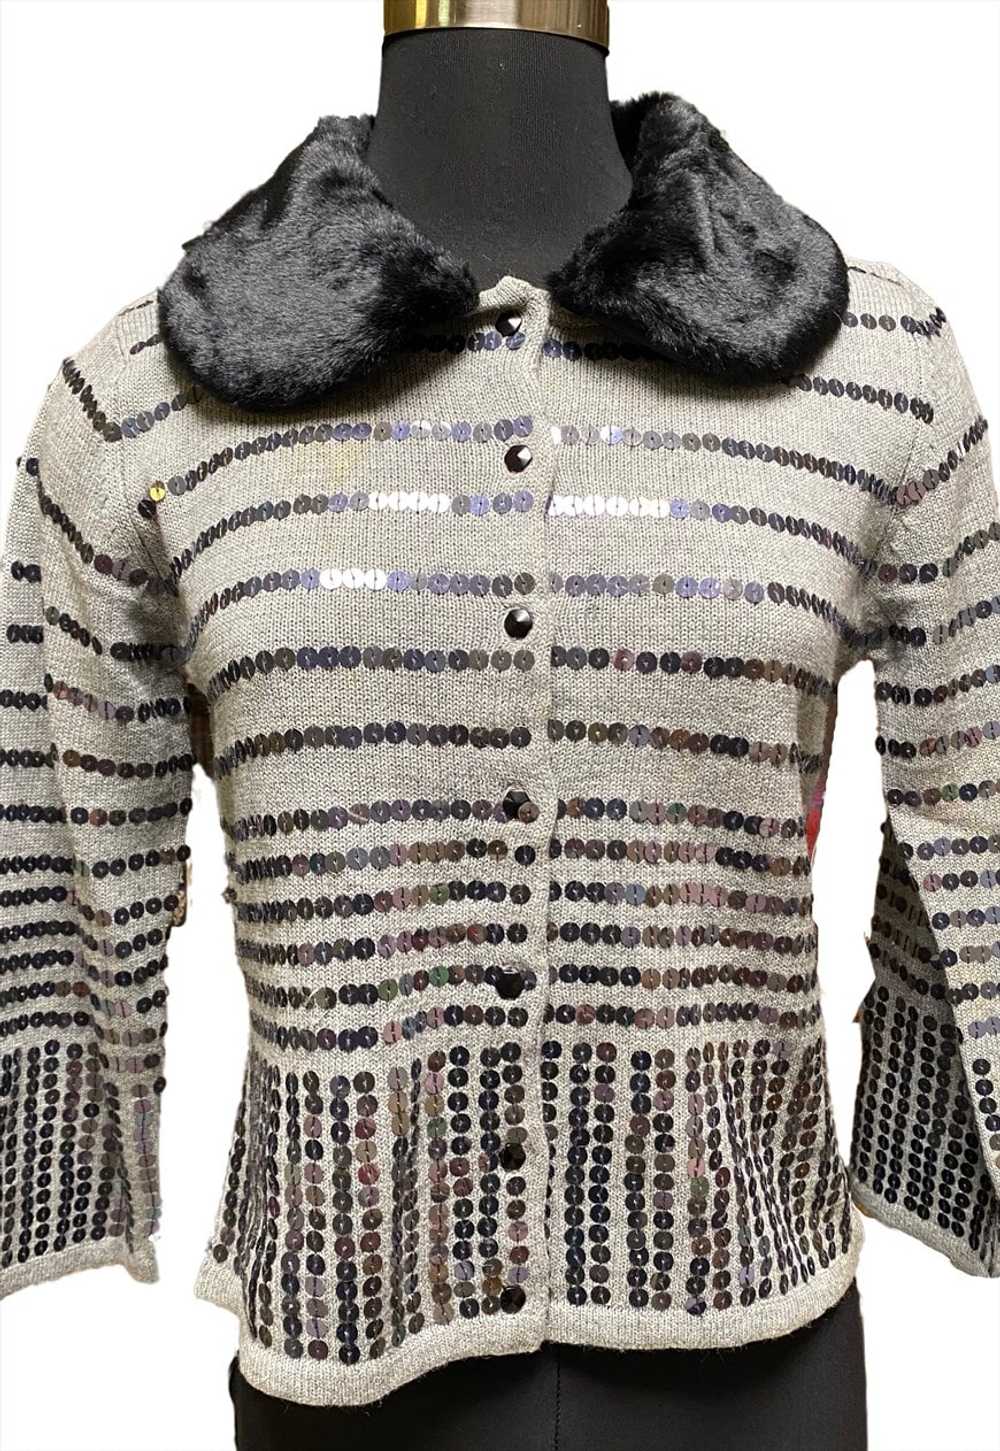 Sequined Cardigan with Faux Fur Trim - image 1